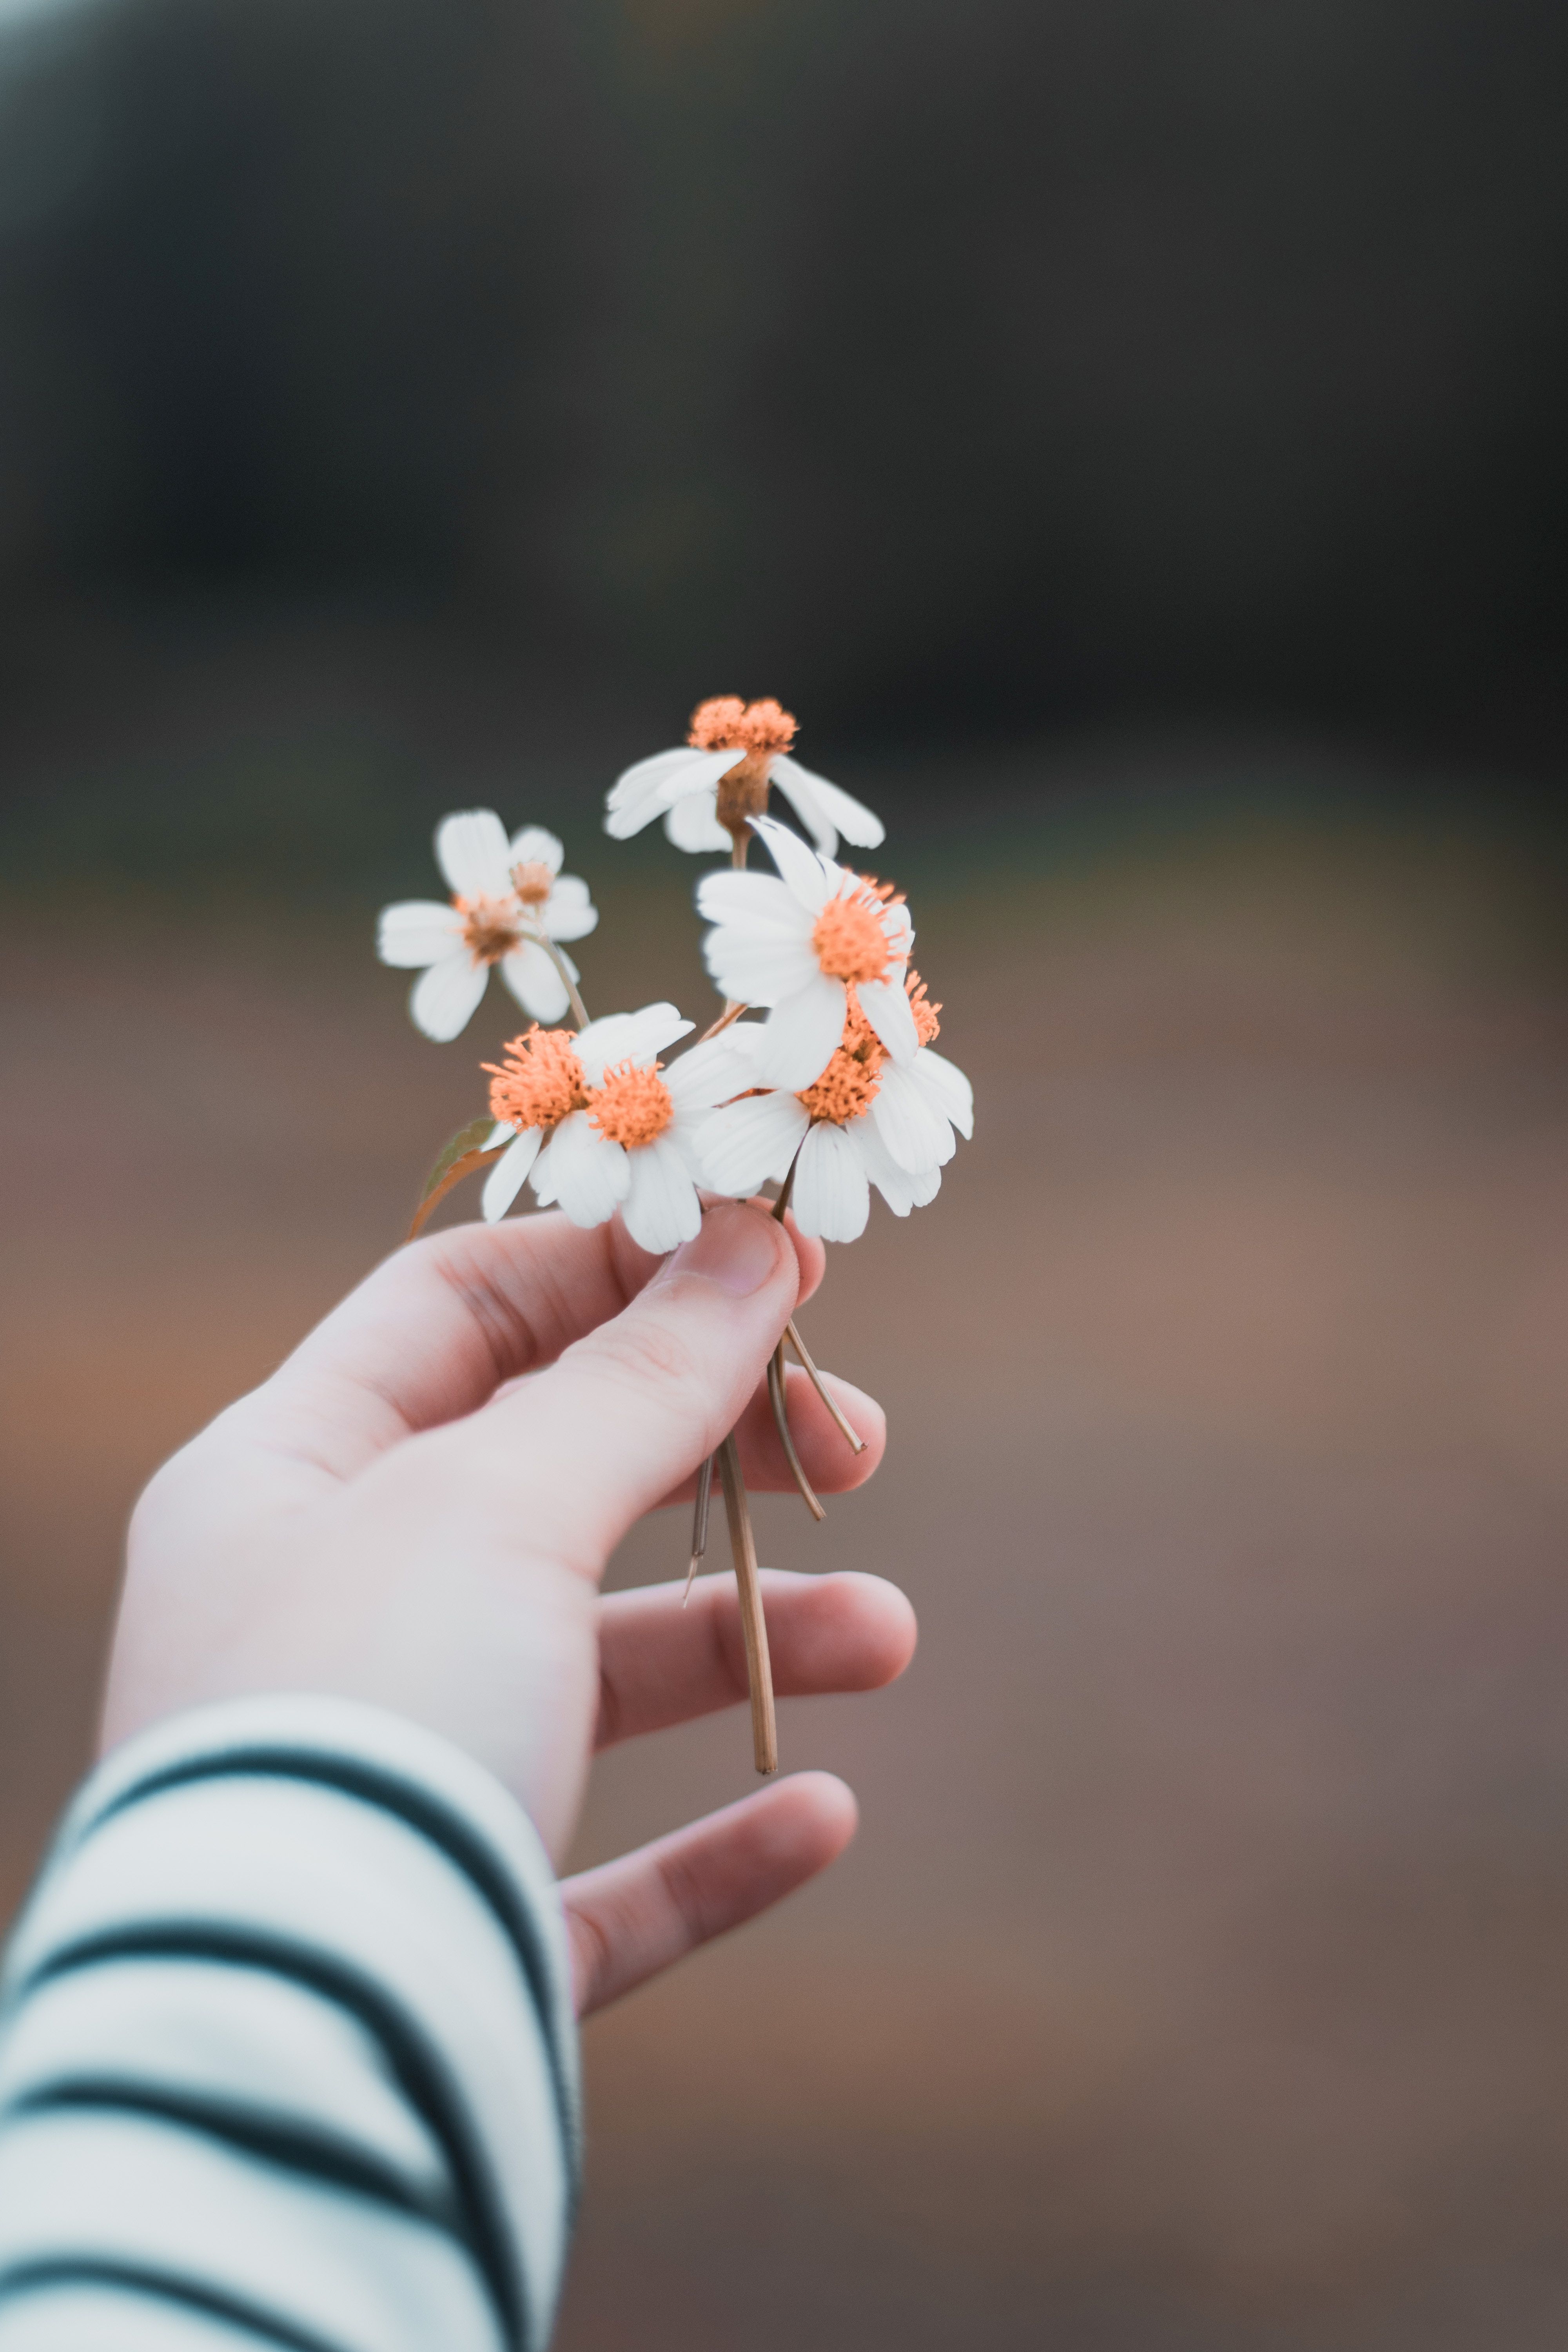 Download background hand, flowers, blur, smooth, field, tenderness